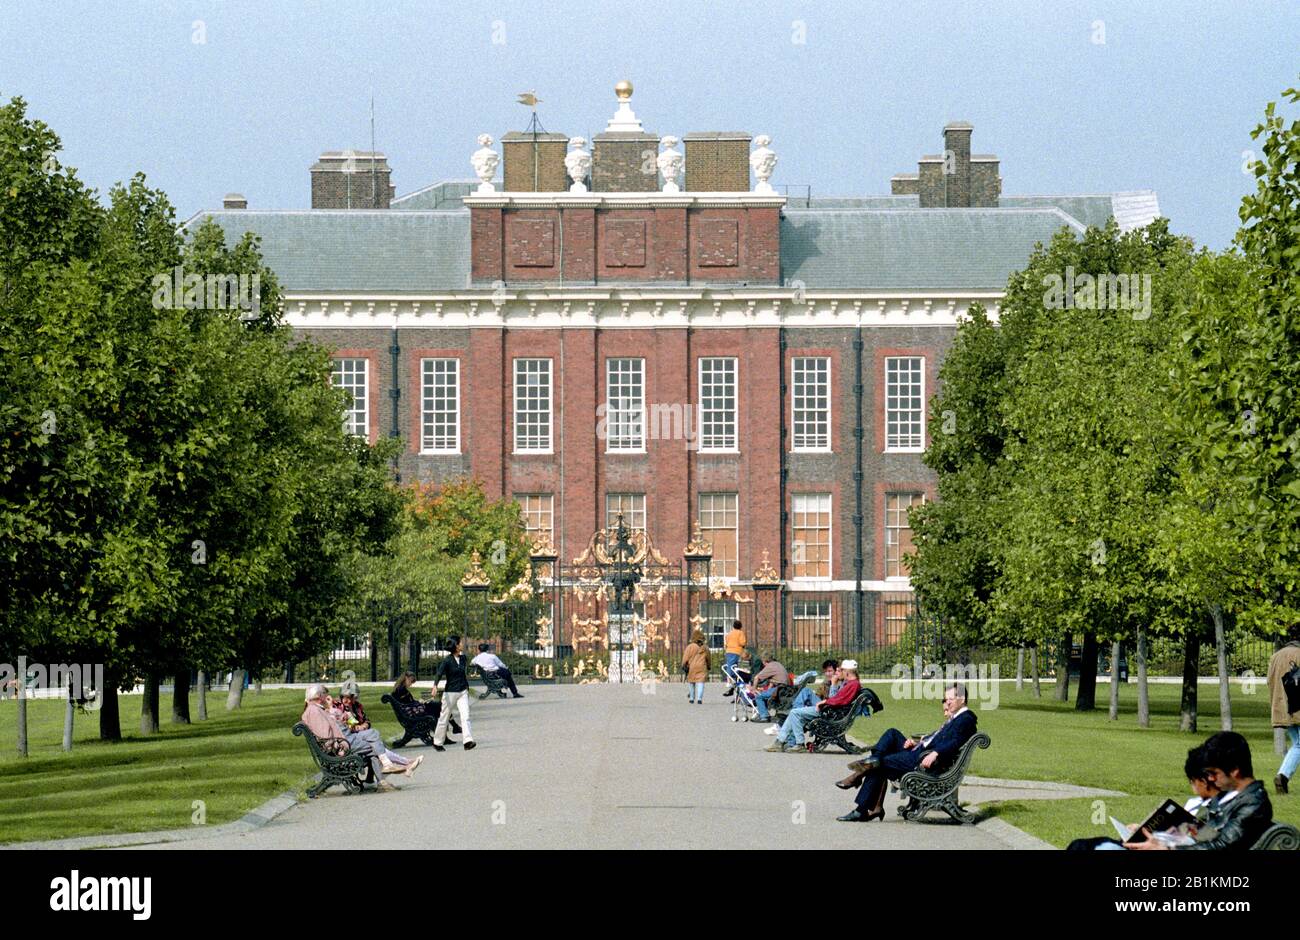 Kensington Palace, London, England. Kensington Palace was the home of HRH Diana, Princess of Wales and is now home to Duke and Duchess of Cambridge. Stock Photo